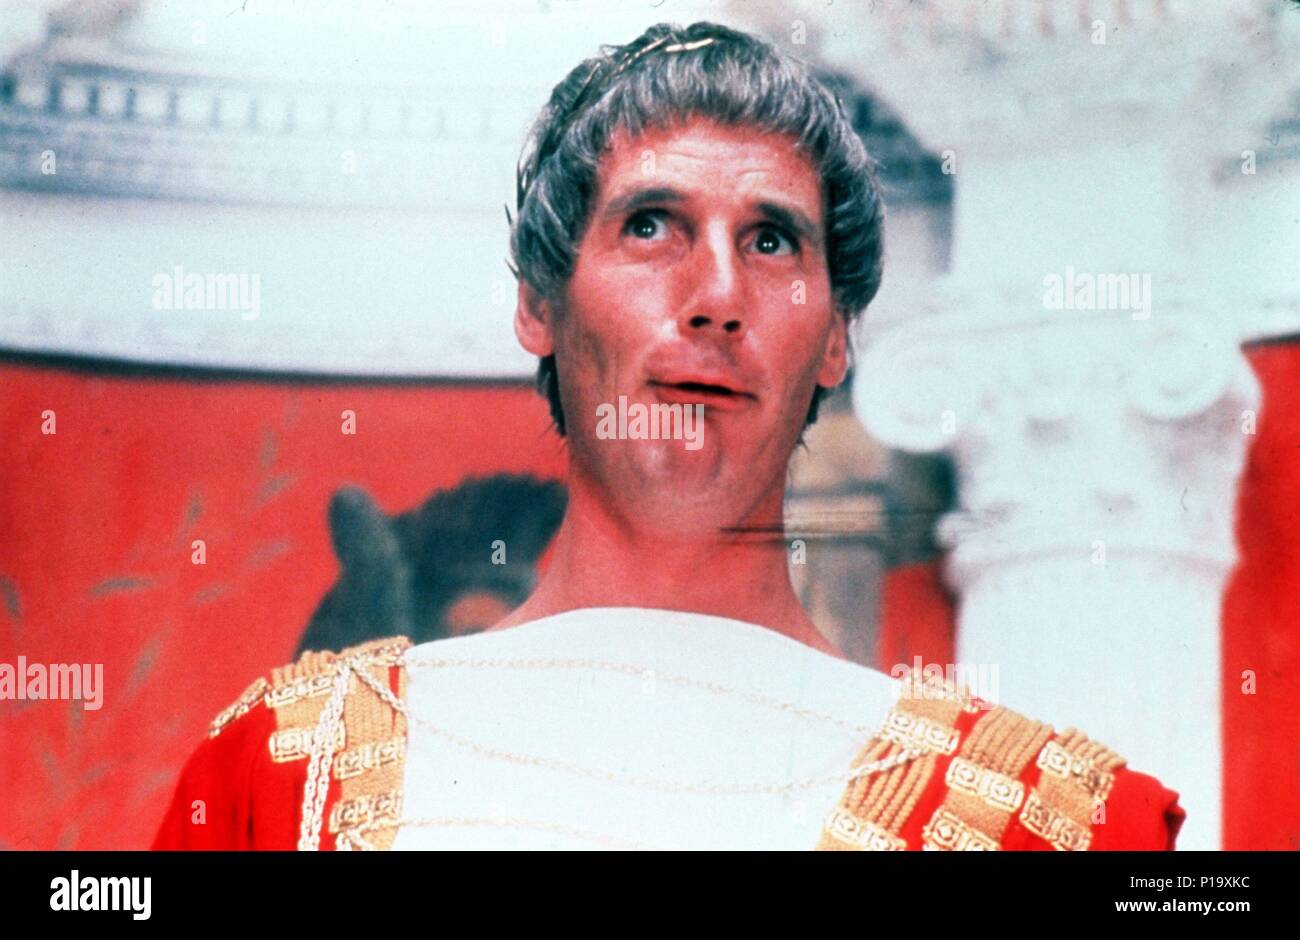 Life Of Brian 1979 Stock Photos & Life Of Brian 1979 Stock Images - Alamy1300 x 940